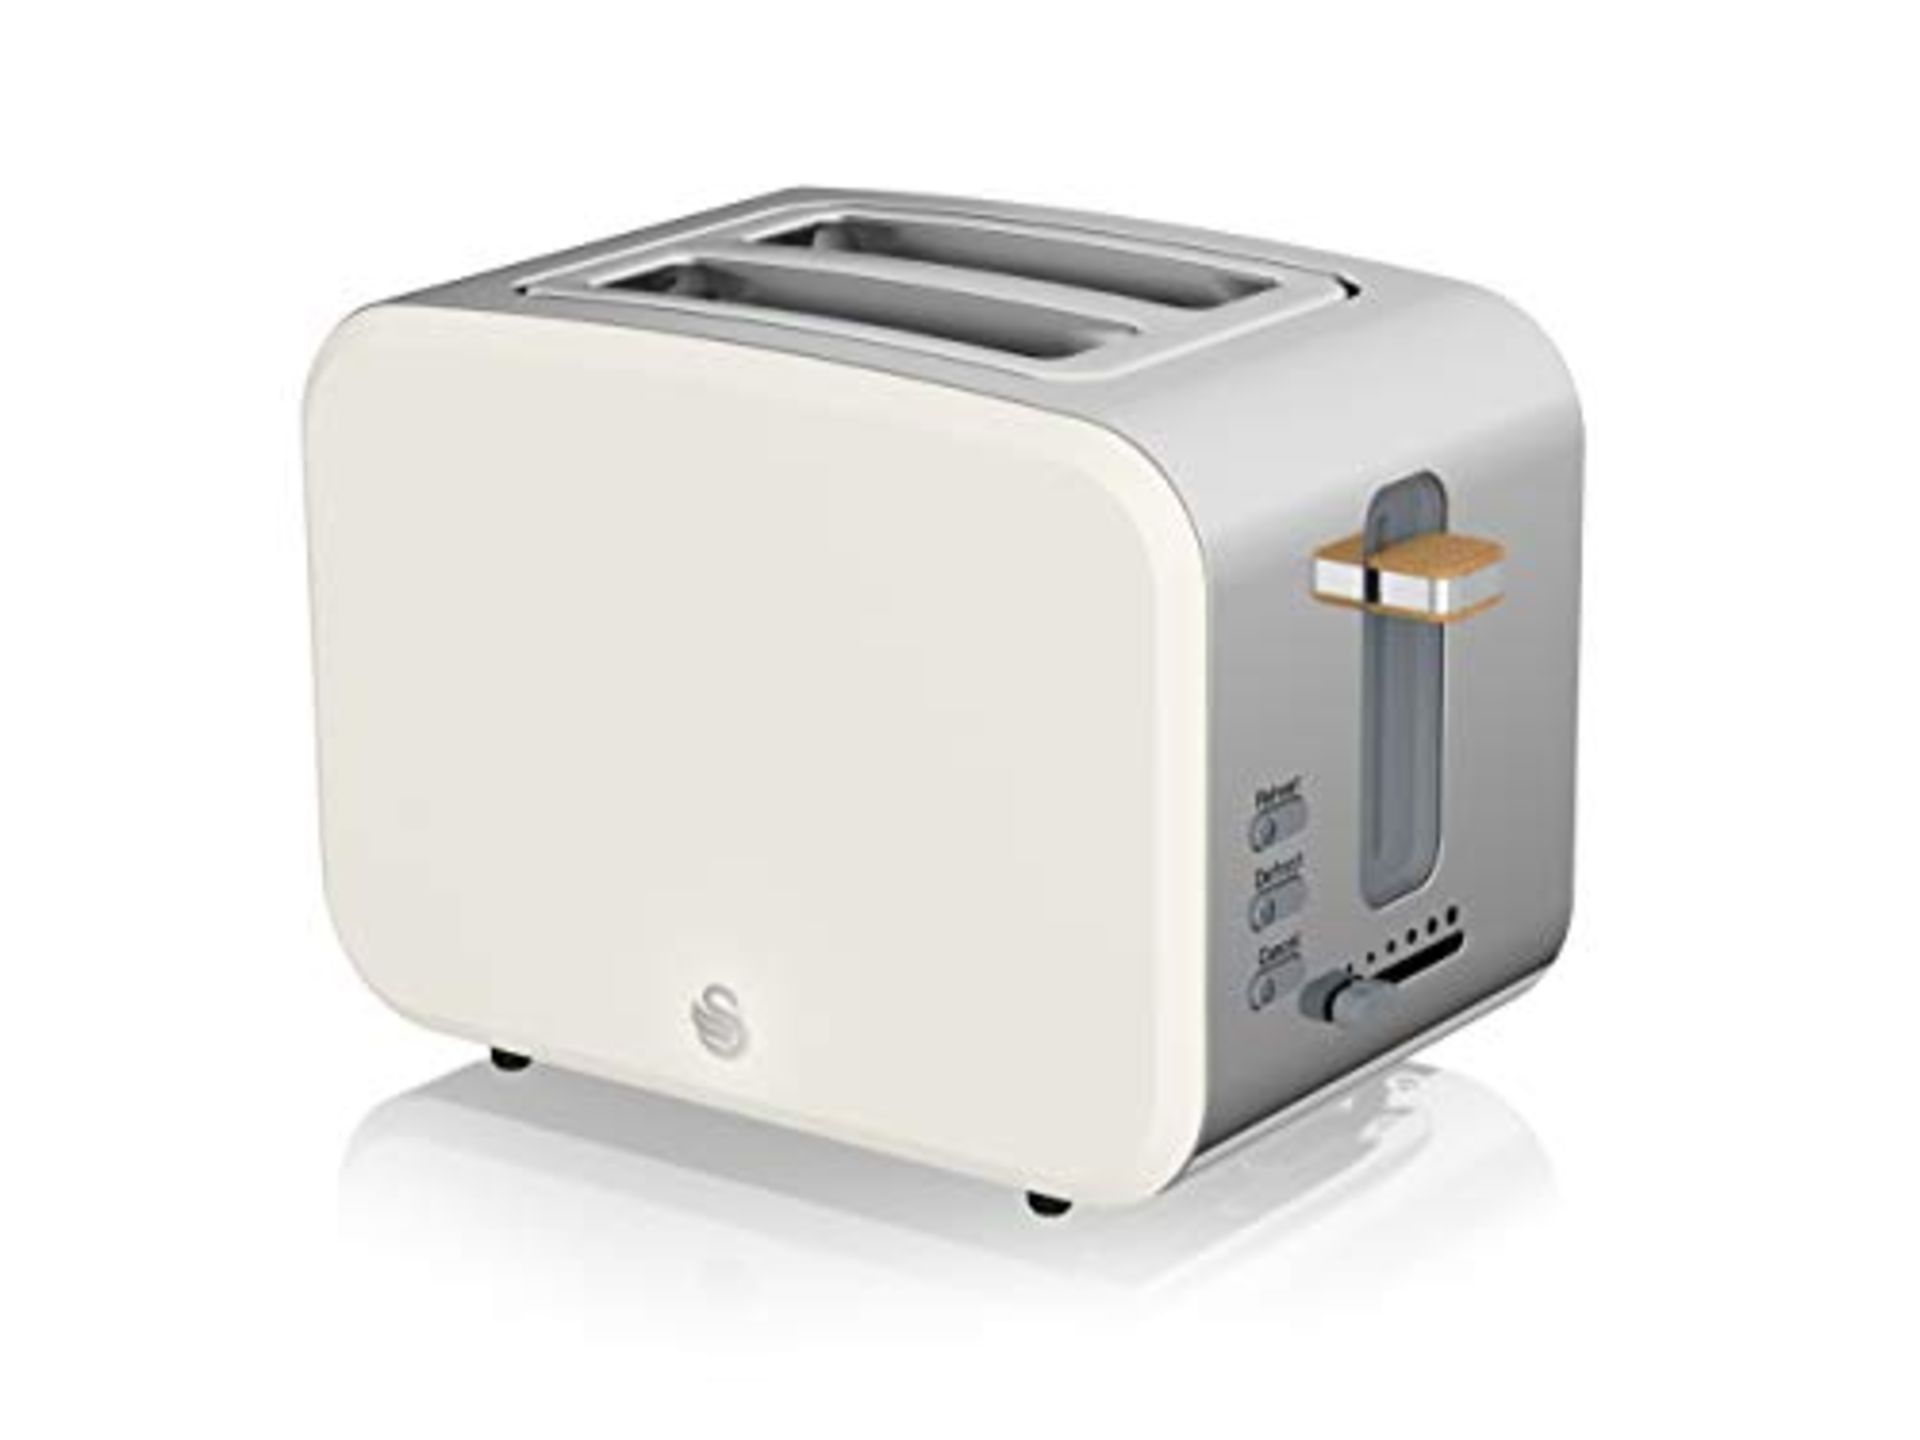 Swan ST14610WHTN, 2 Slice Nordic Toaster, Soft Touch Housing and Matt Finish, 900W, Co